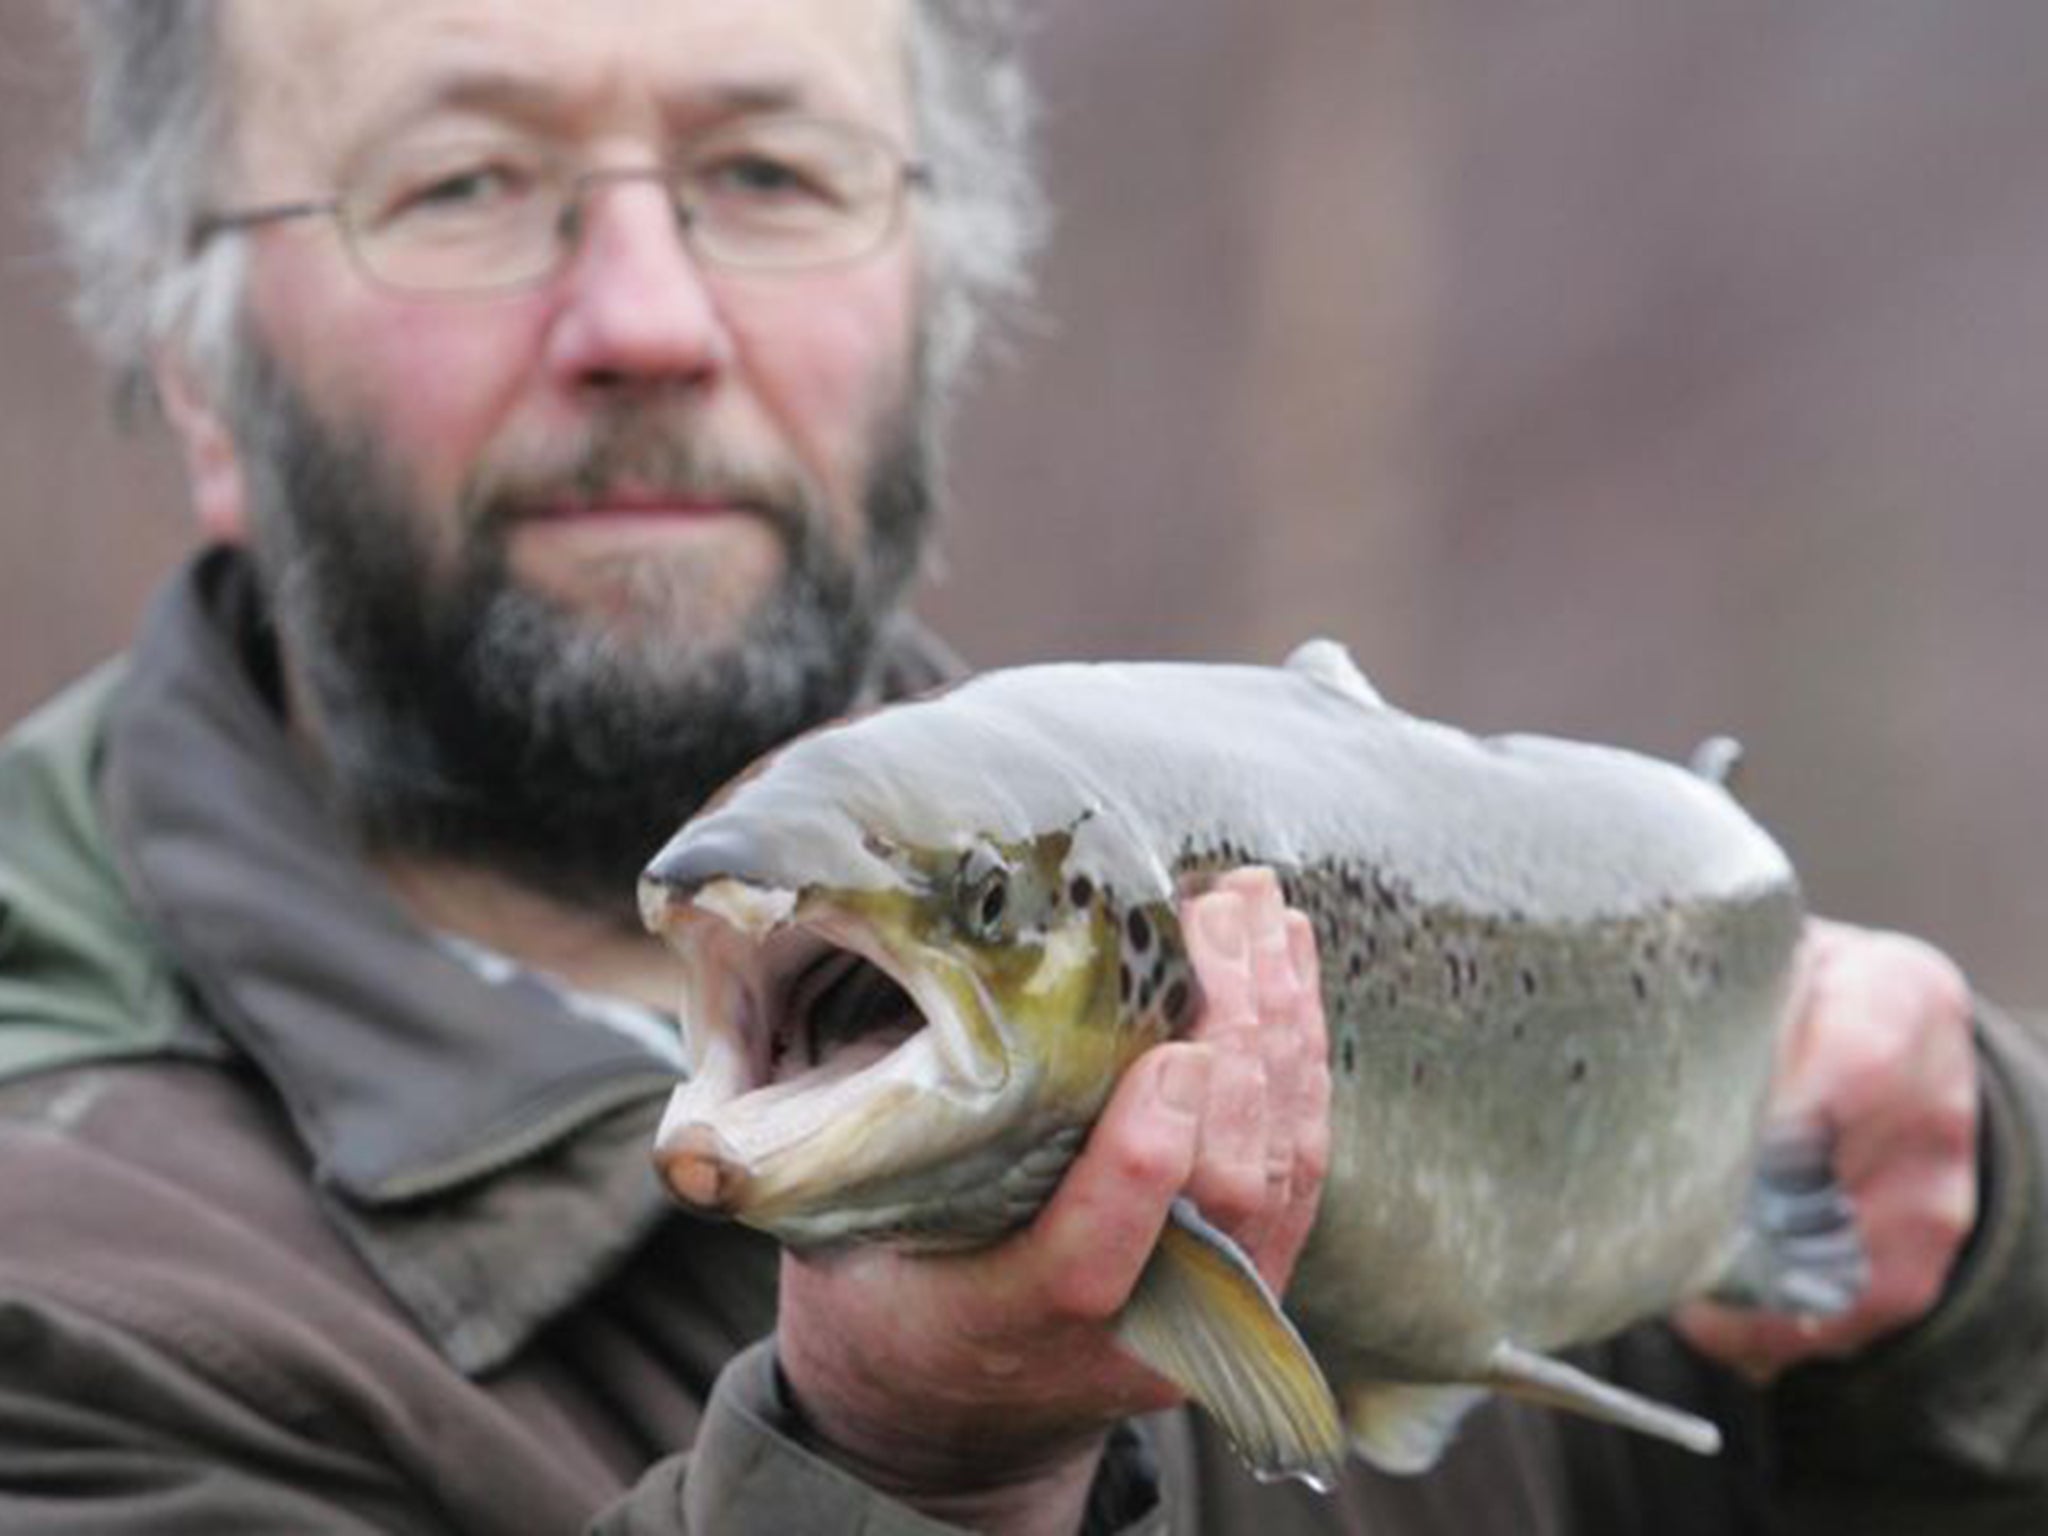 Bob Kindness, who released 330,000 young salmon into the river Carron last year